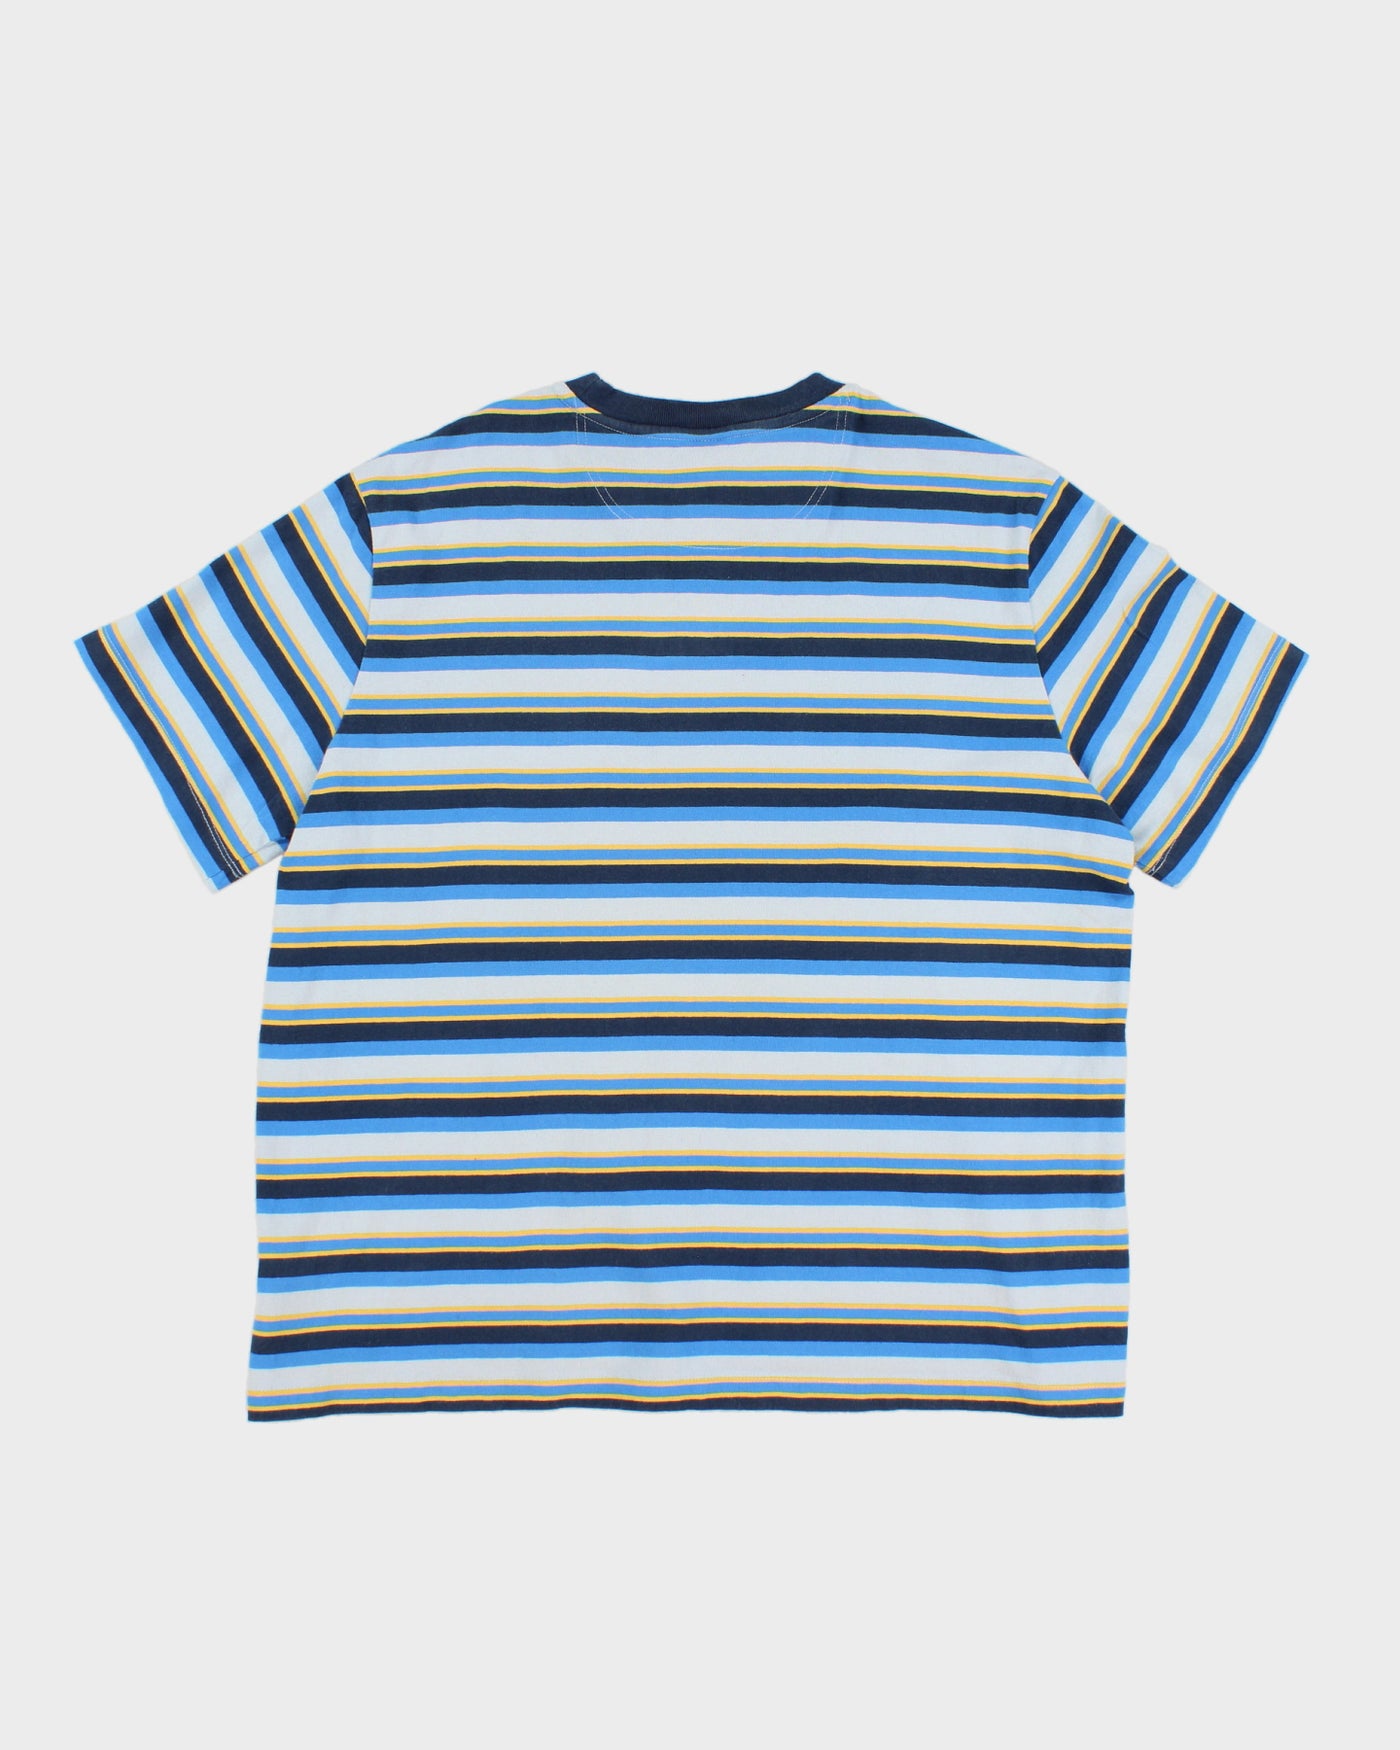 The North Face Blue & Yellow Stripe T-Shirt - XL